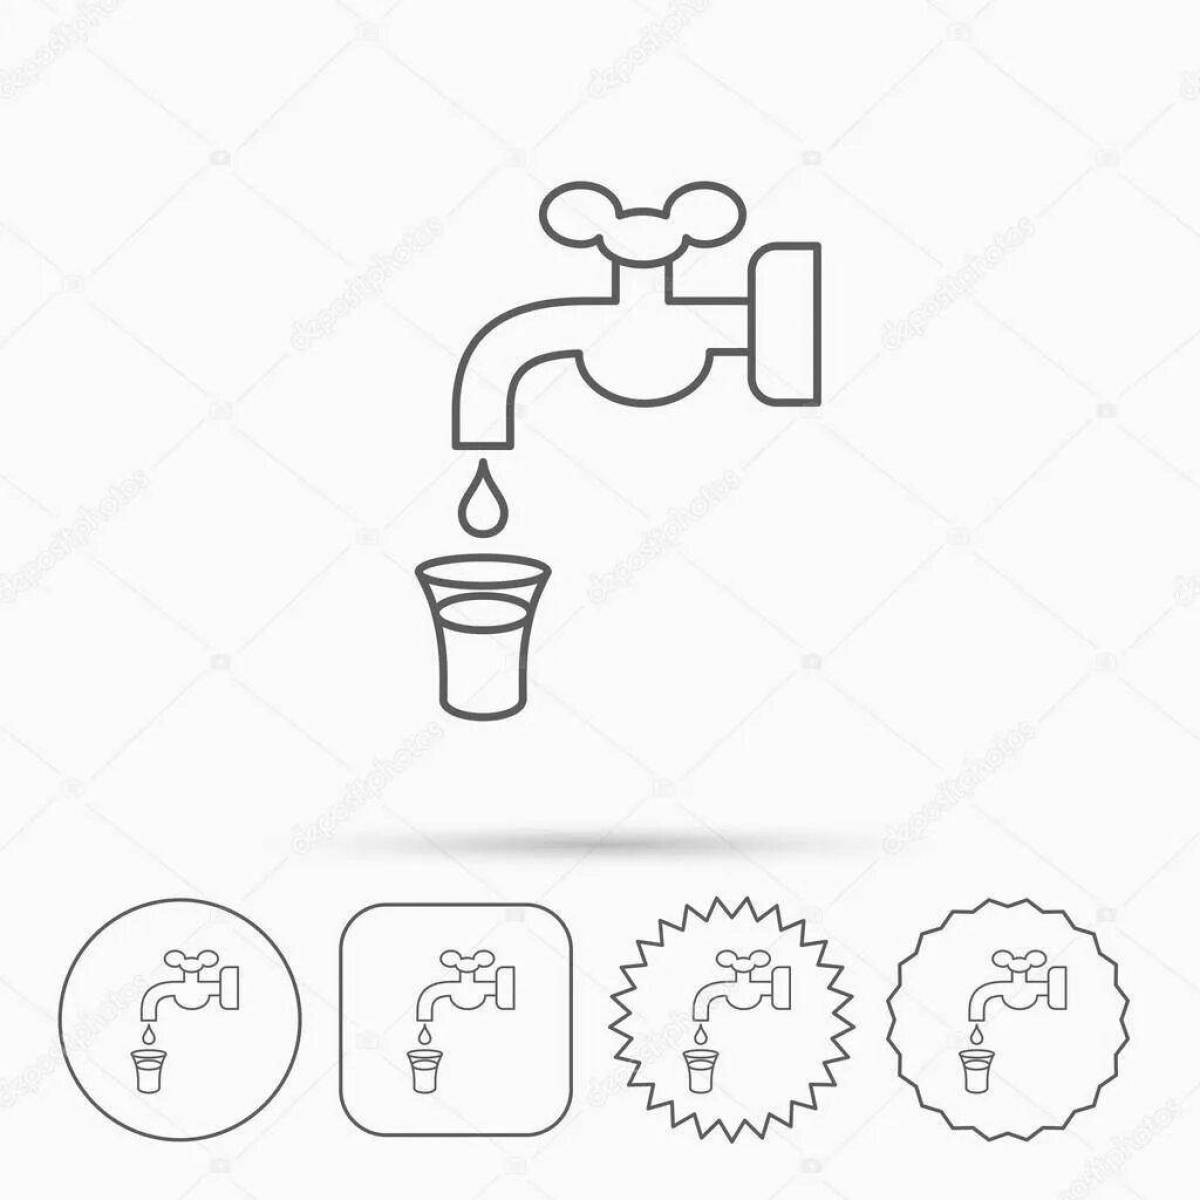 Save water creative coloring page